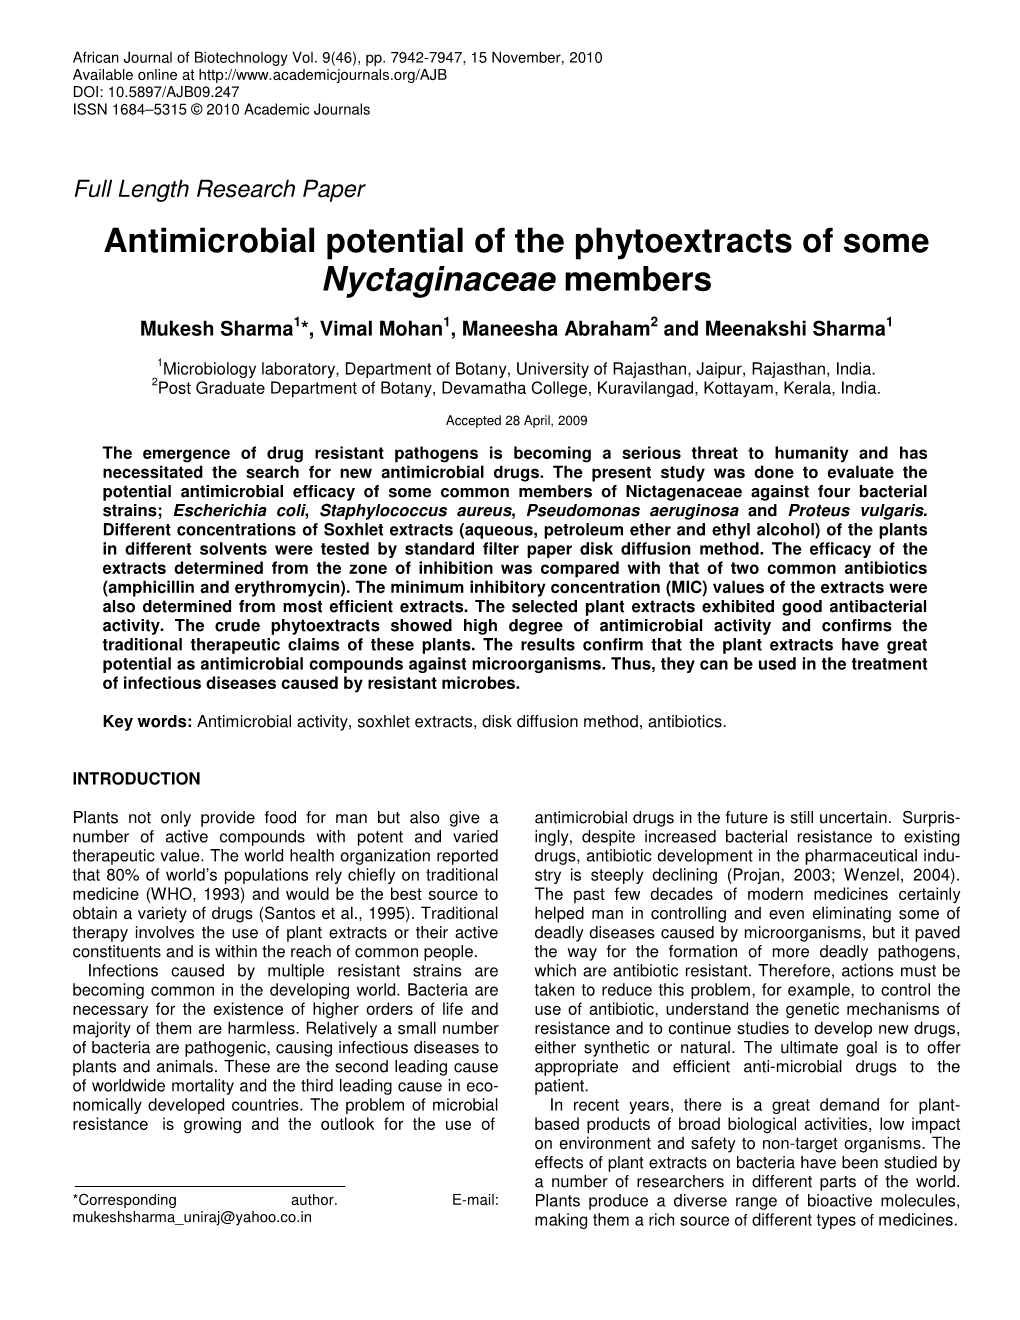 Antimicrobial Potential of the Phytoextracts of Some Nyctaginaceae Members